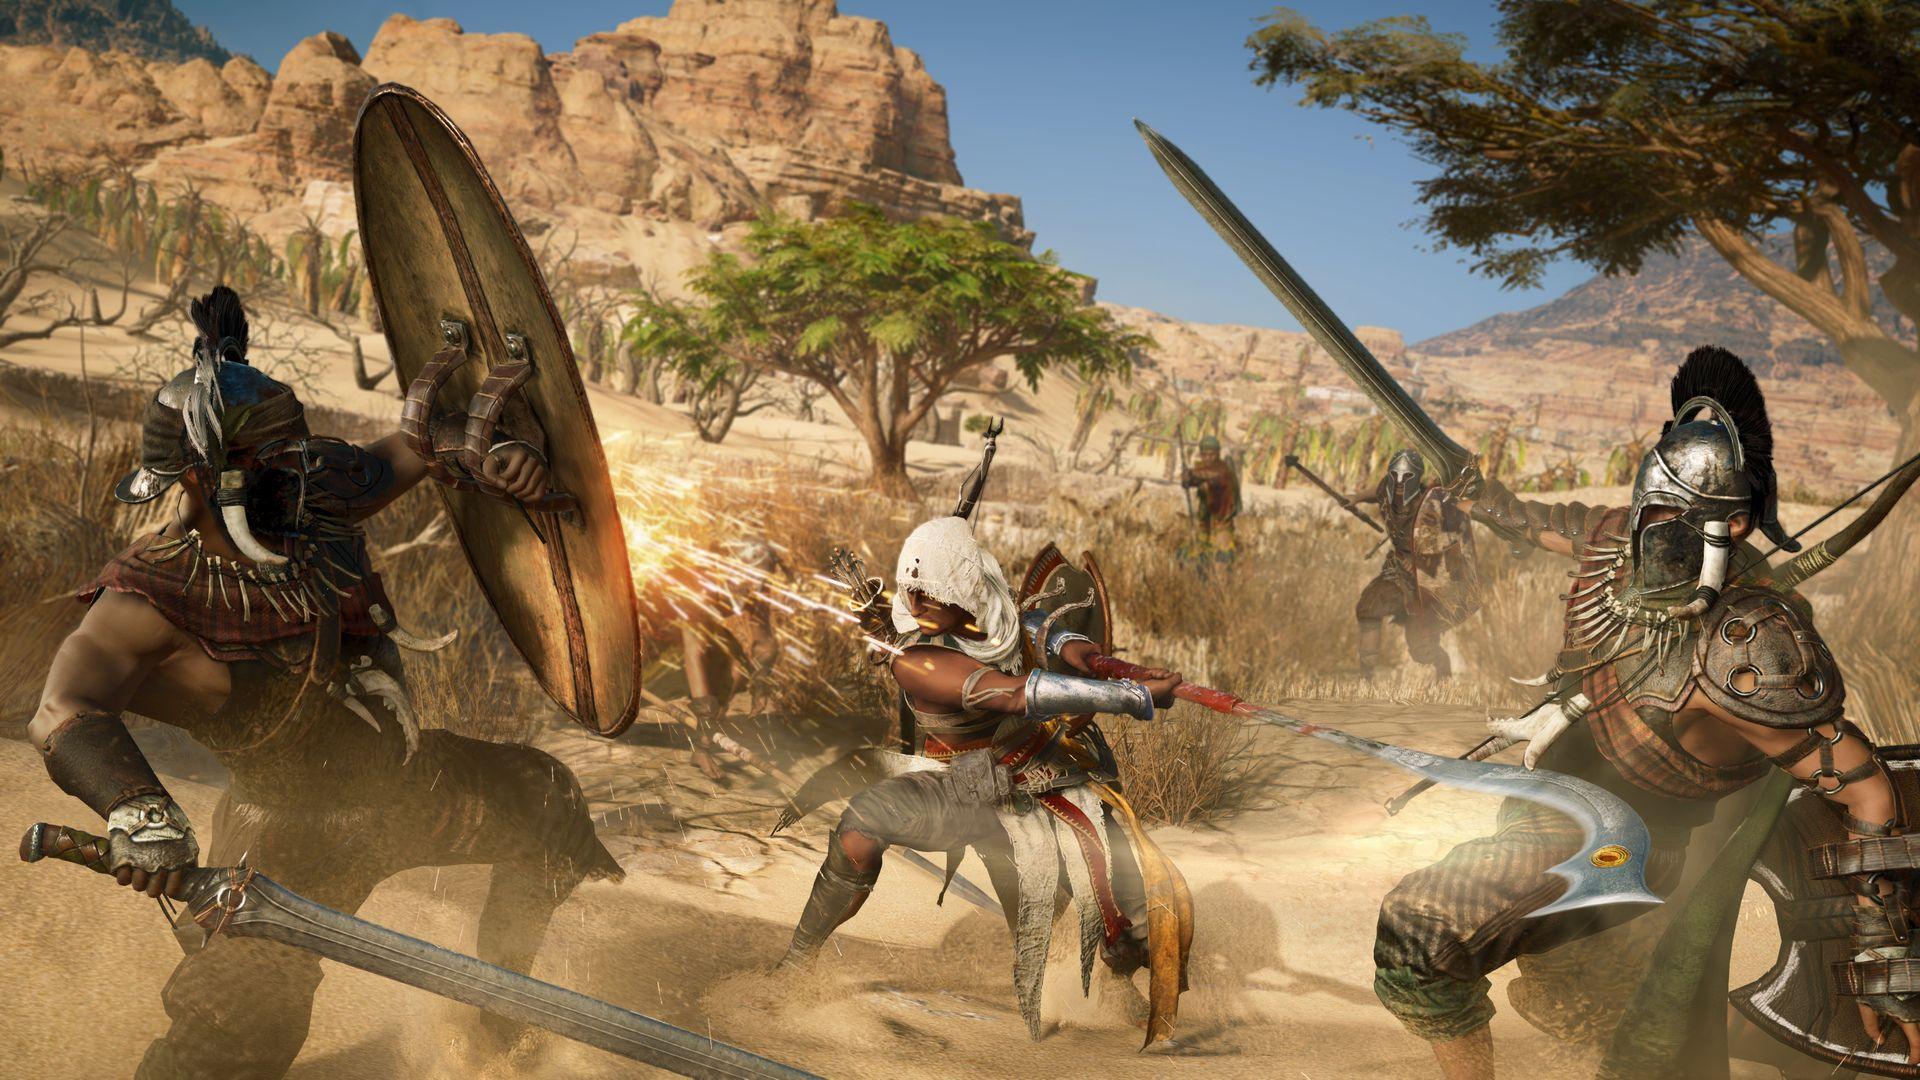 Dive into Egypt with our first play of Assassin's Creed Origins